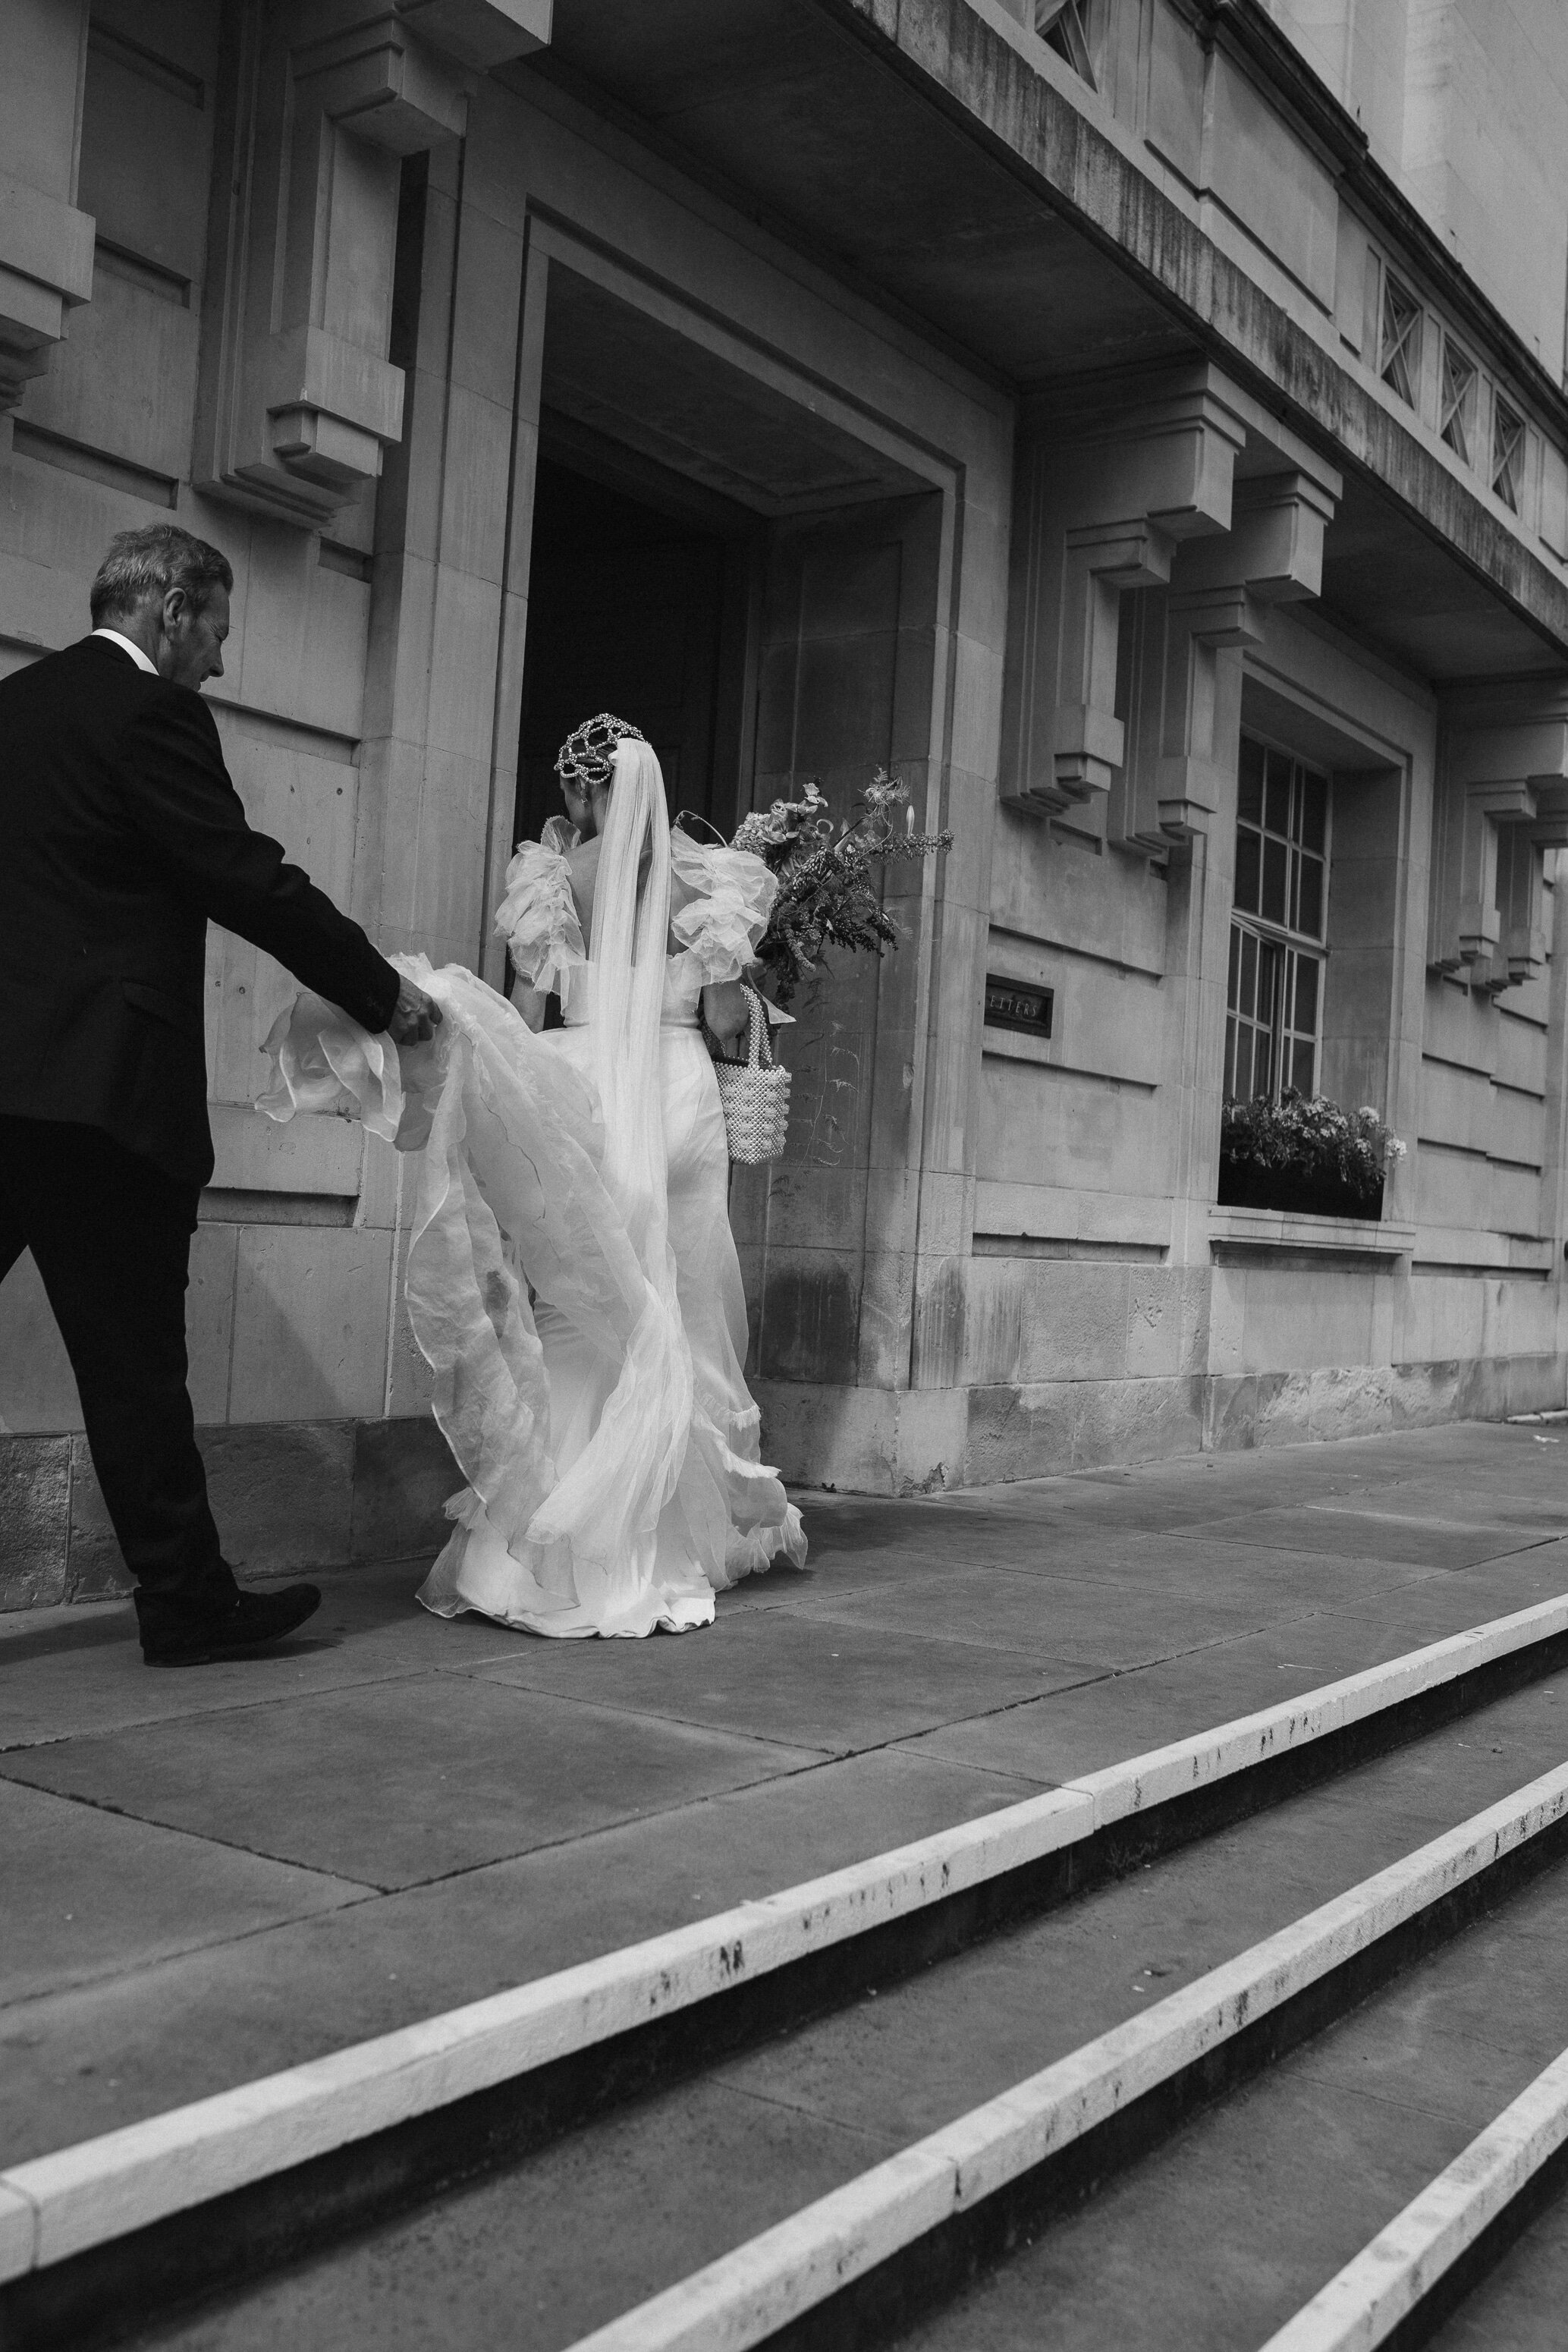 Beautiful bride Laura wore the Mayfair dress by Halfpenny London on her wedding day